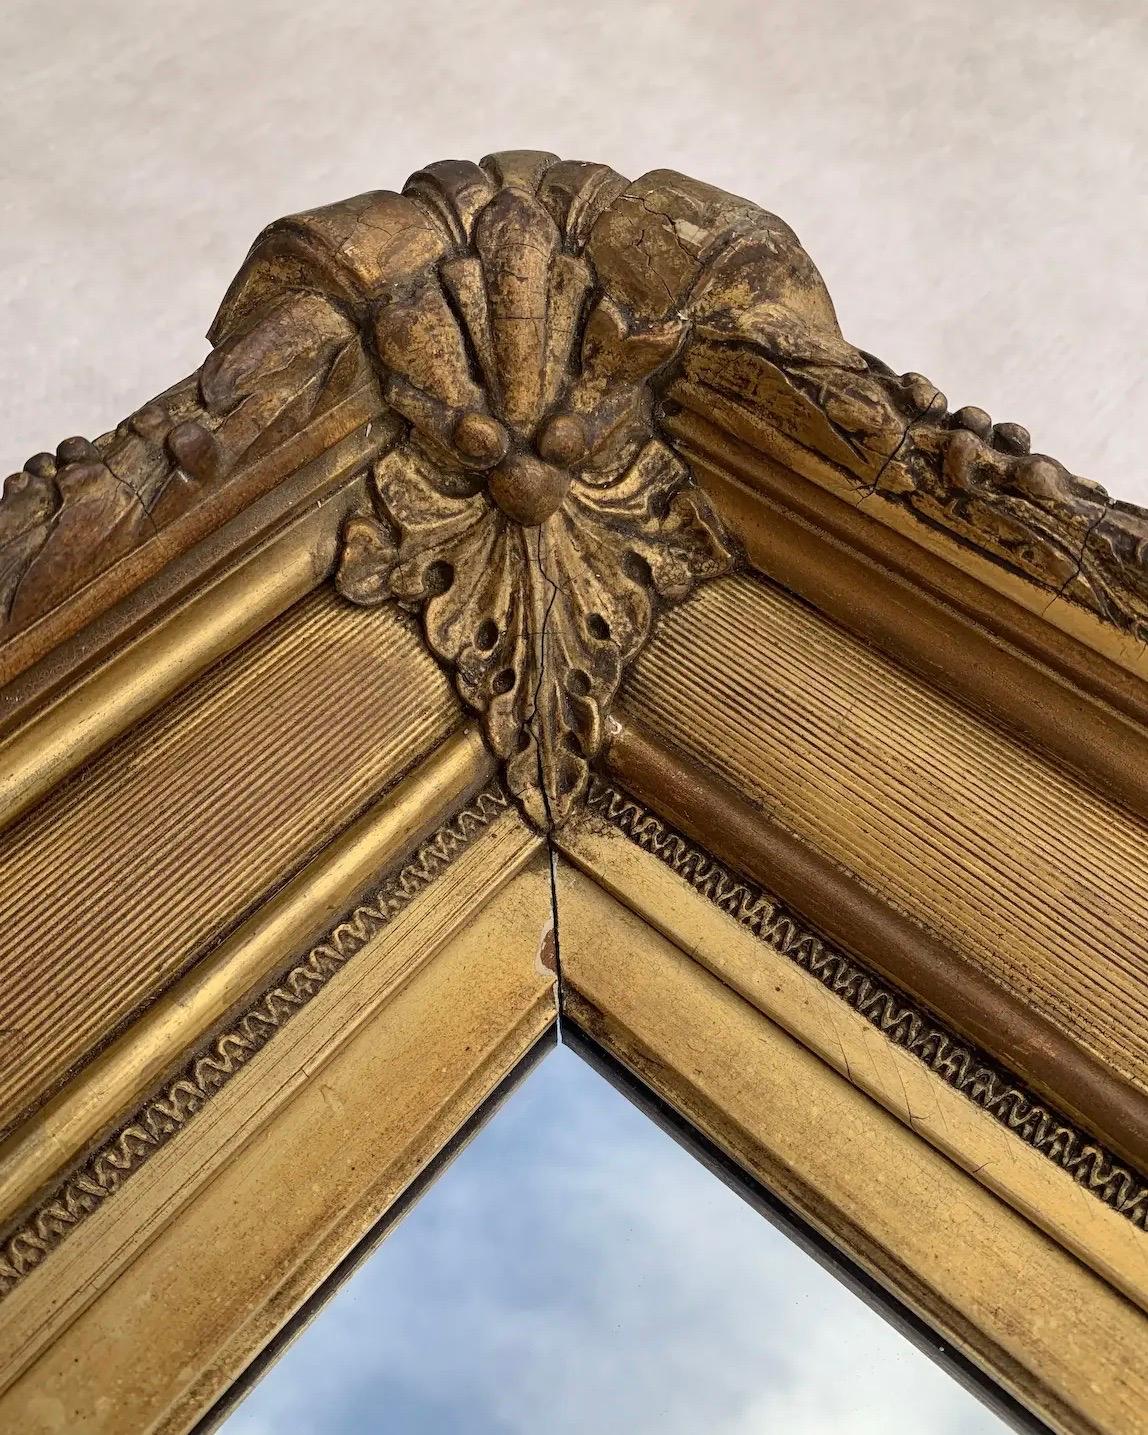 Offering a large ornately carved Italian wall mirror featuring an antique giltwood frame from the late 18th century. At nearly 42”L x 34”W with a substantial 3-1/2” depth this piece is prepared to make an elegant statement. Perfect companion for a